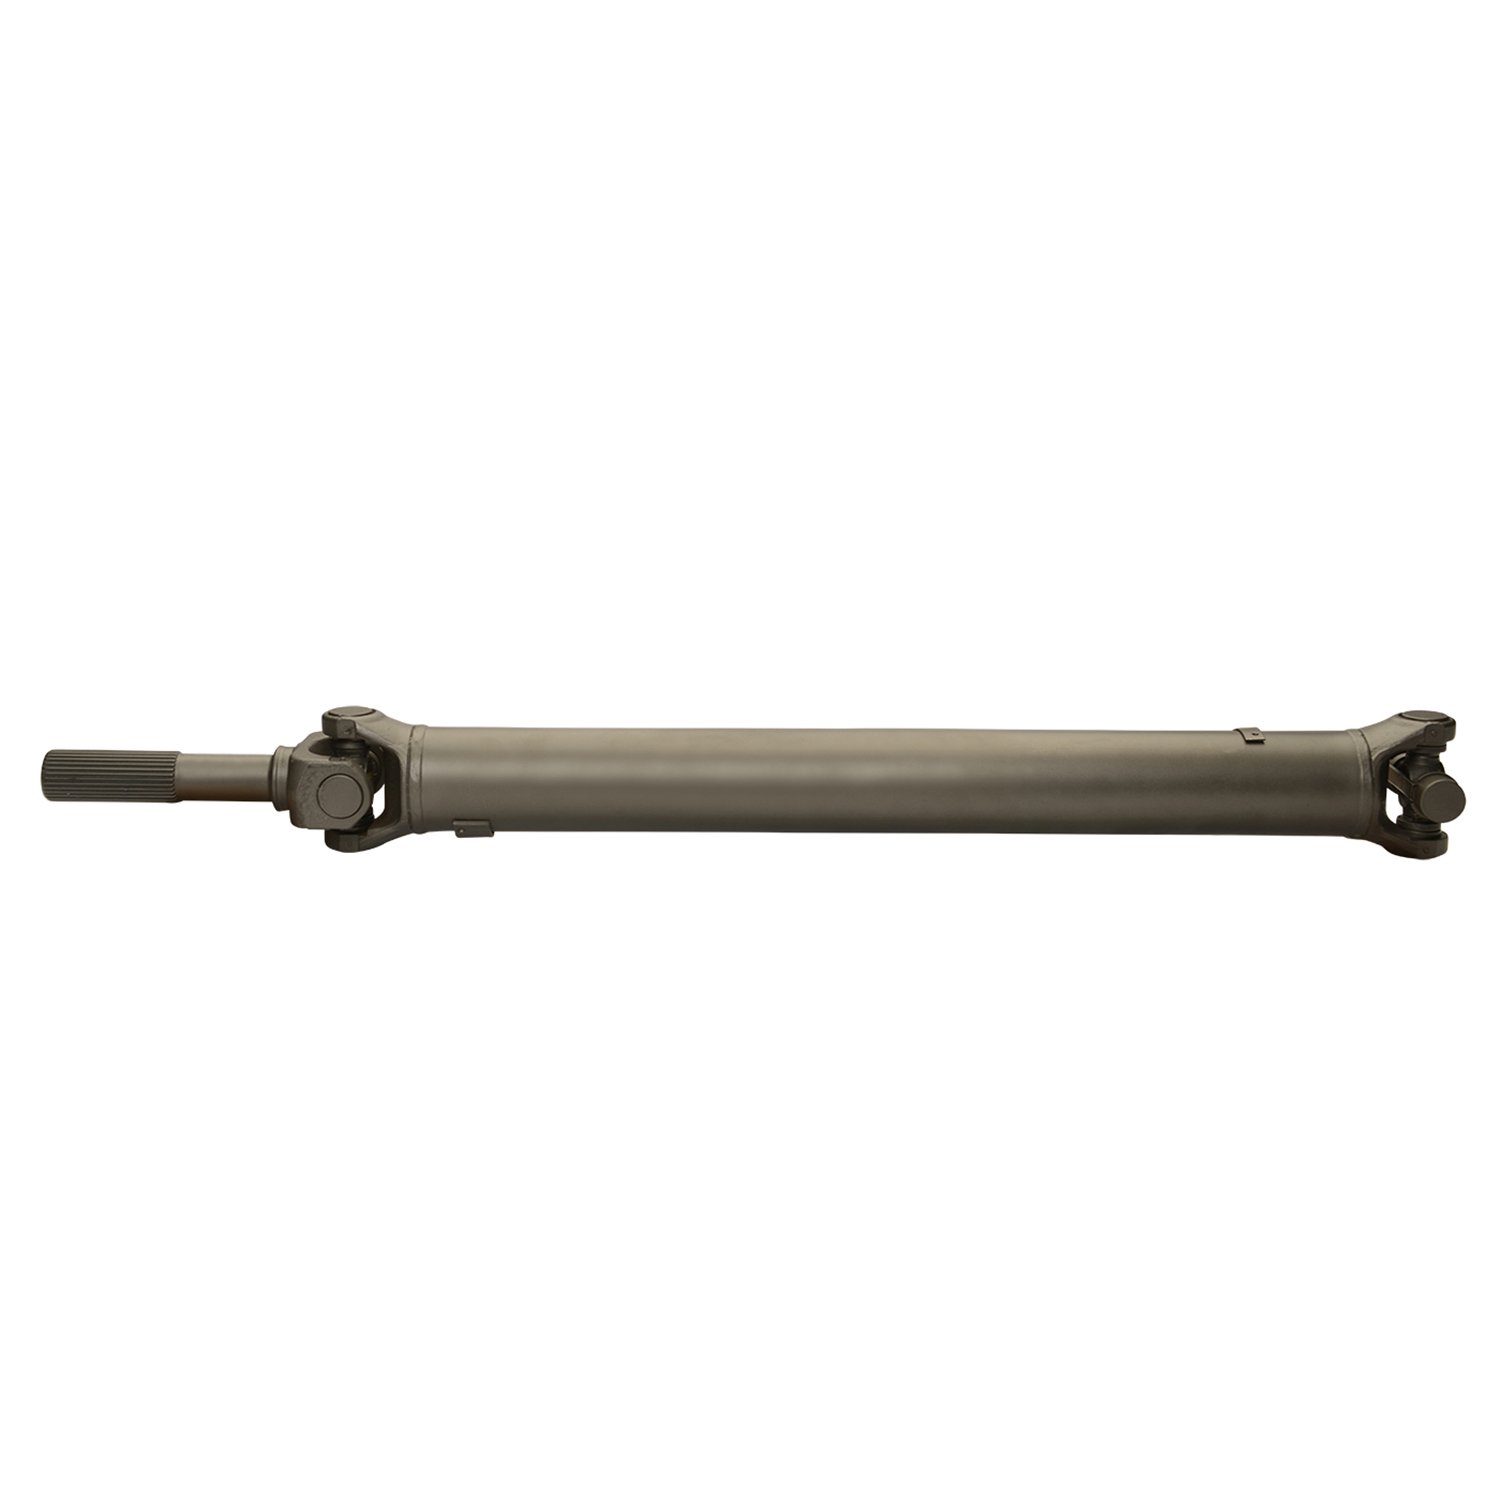 USA Standard ZDS9363 Front Driveshaft, Cadillac Escalade/GM Truck & Suv, 27.25 in. Center-To-Center